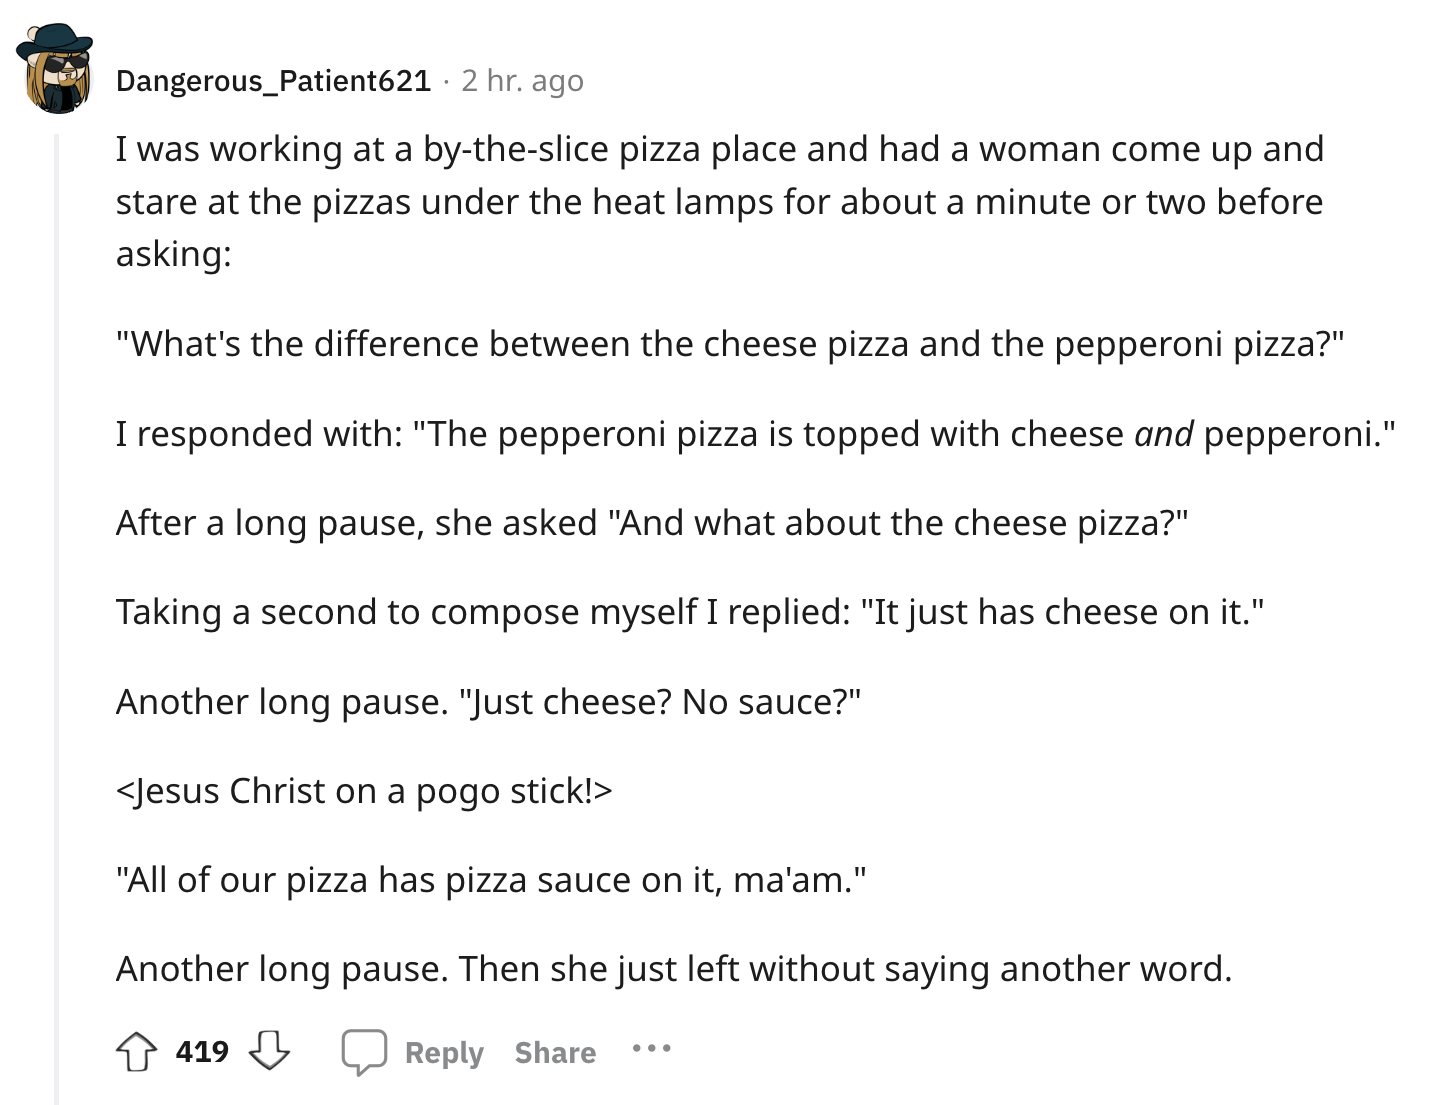 document - Dangerous_Patient621 2 hr. ago I was working at a bytheslice pizza place and had a woman come up and stare at the pizzas under the heat lamps for about a minute or two before asking "What's the difference between the cheese pizza and the pepper